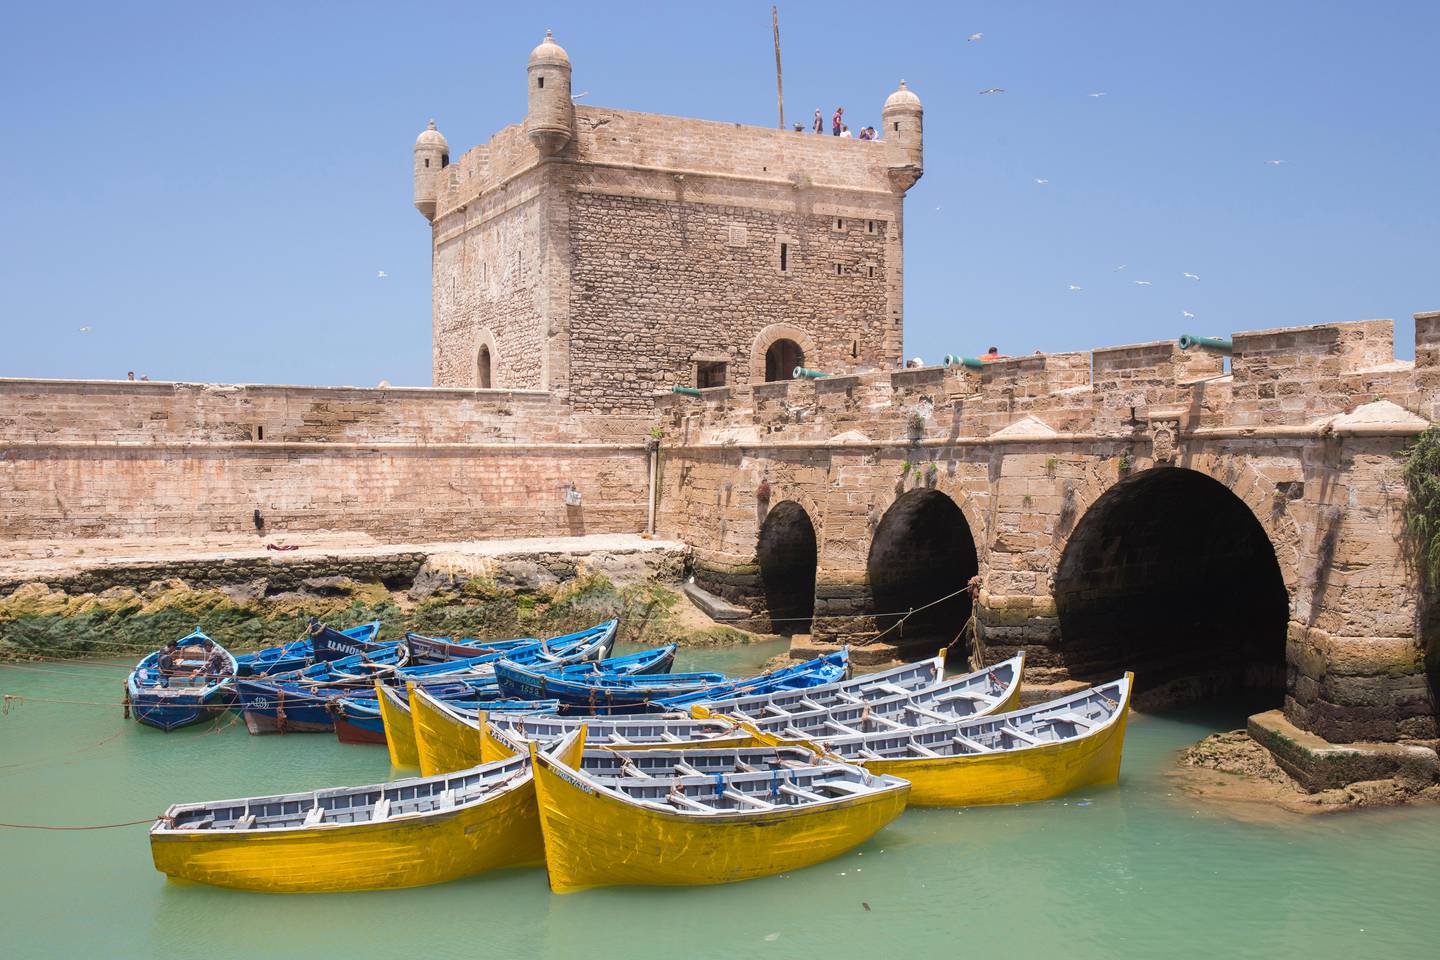 Boats moored in the fishing and harbour area in Essaouira, Morocco. Getty Images